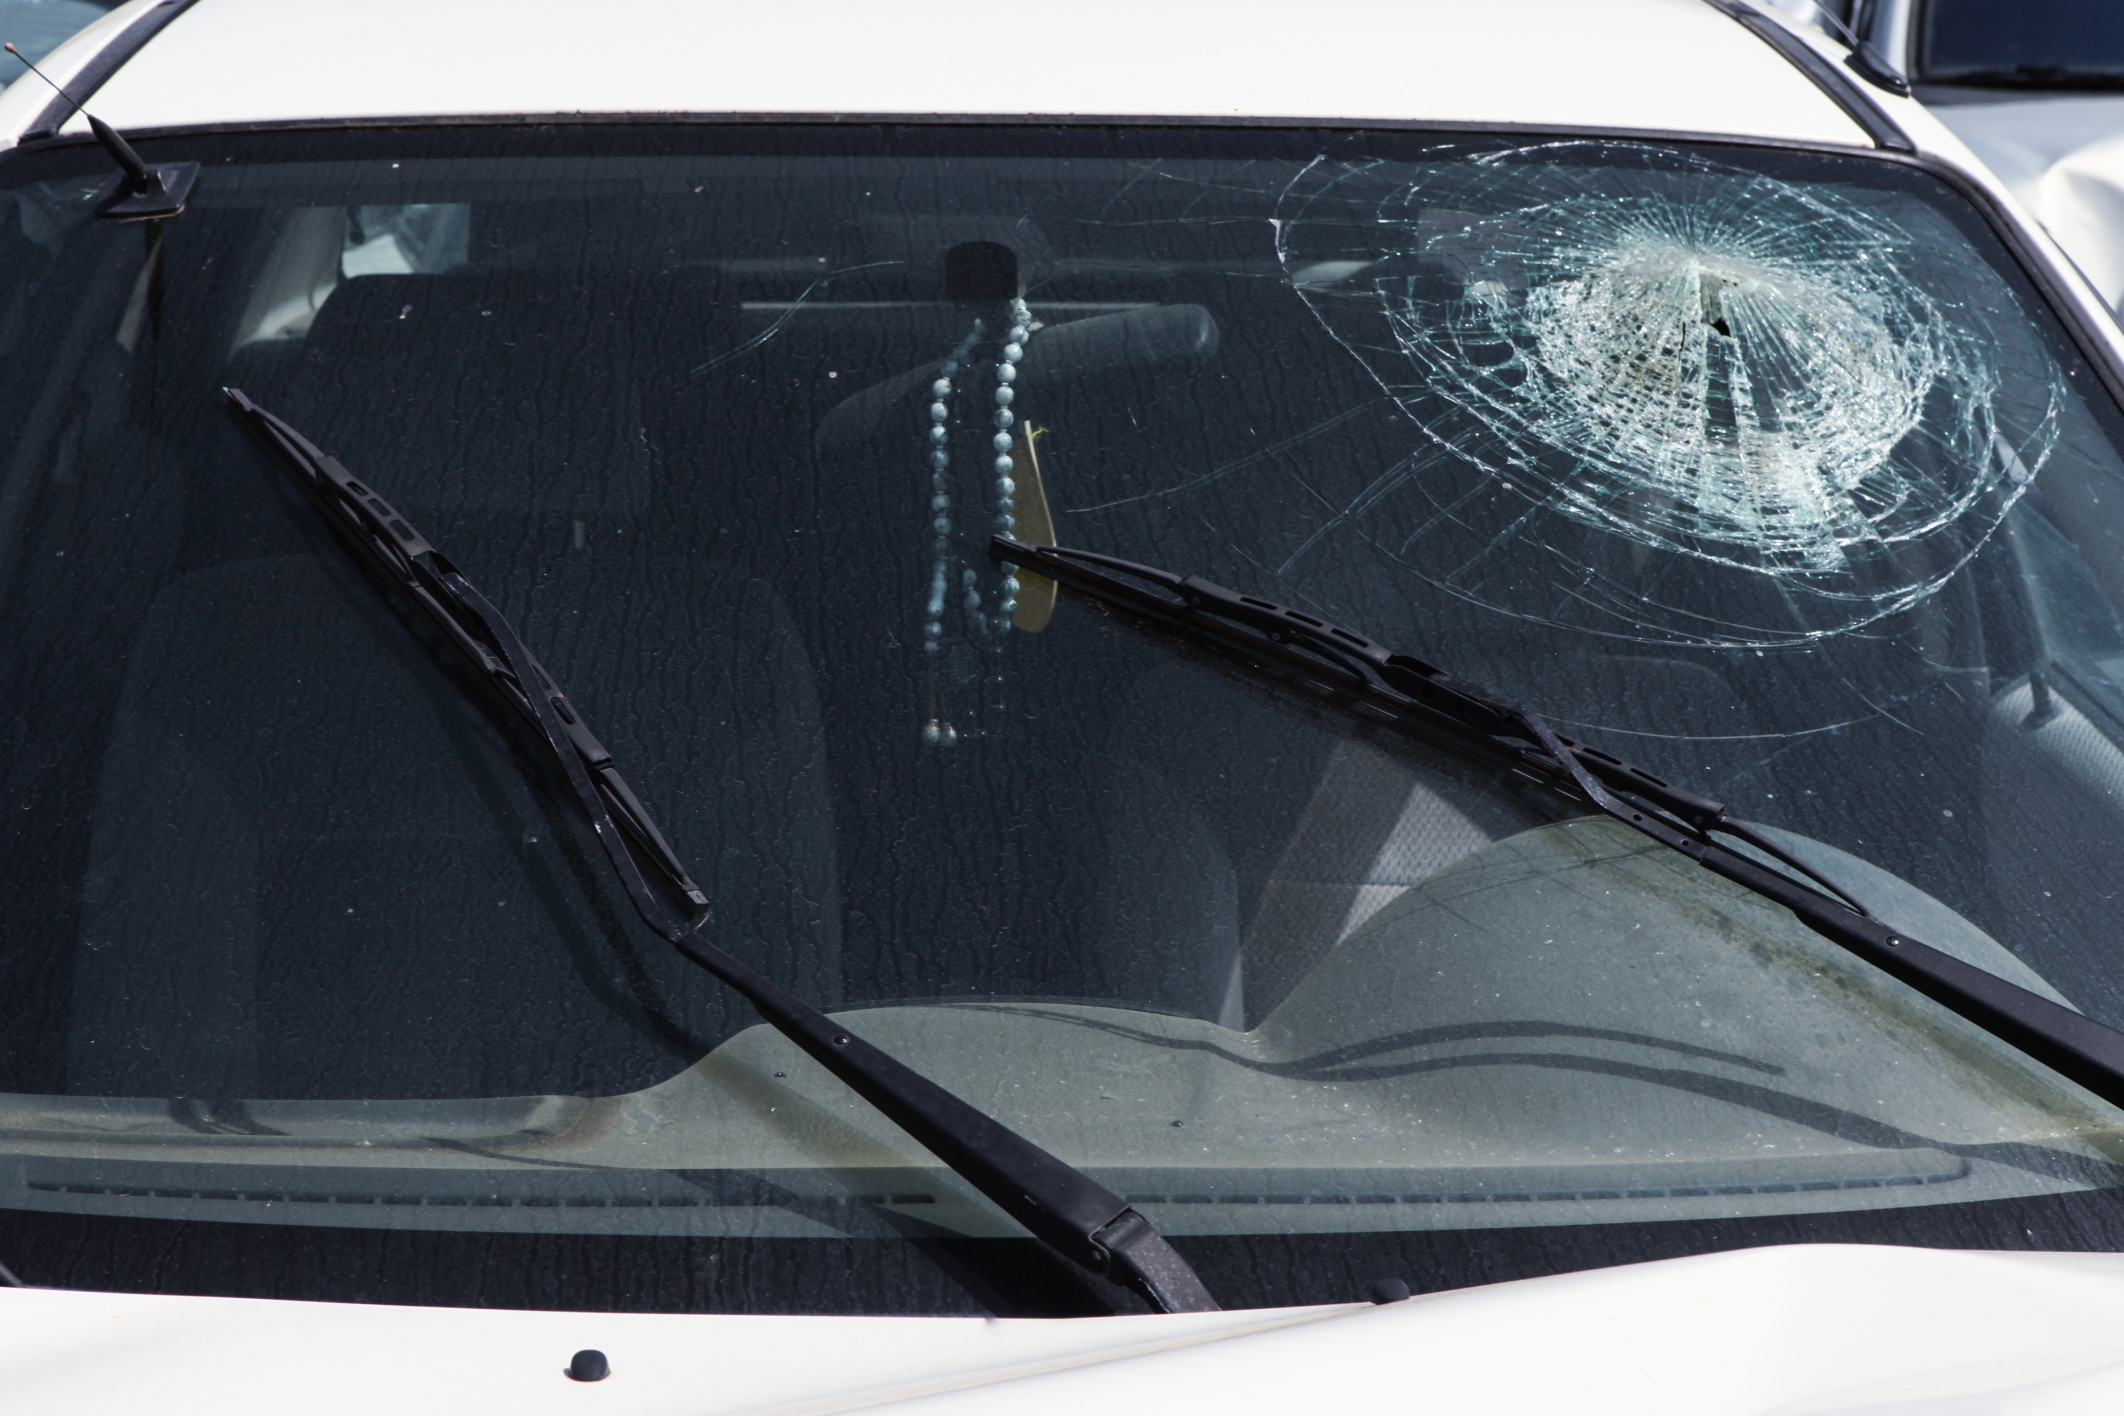 Aaa Insurance Windshield Replacement Auto Glass Aaa Glass / Our exclusive glasshealer™ resin